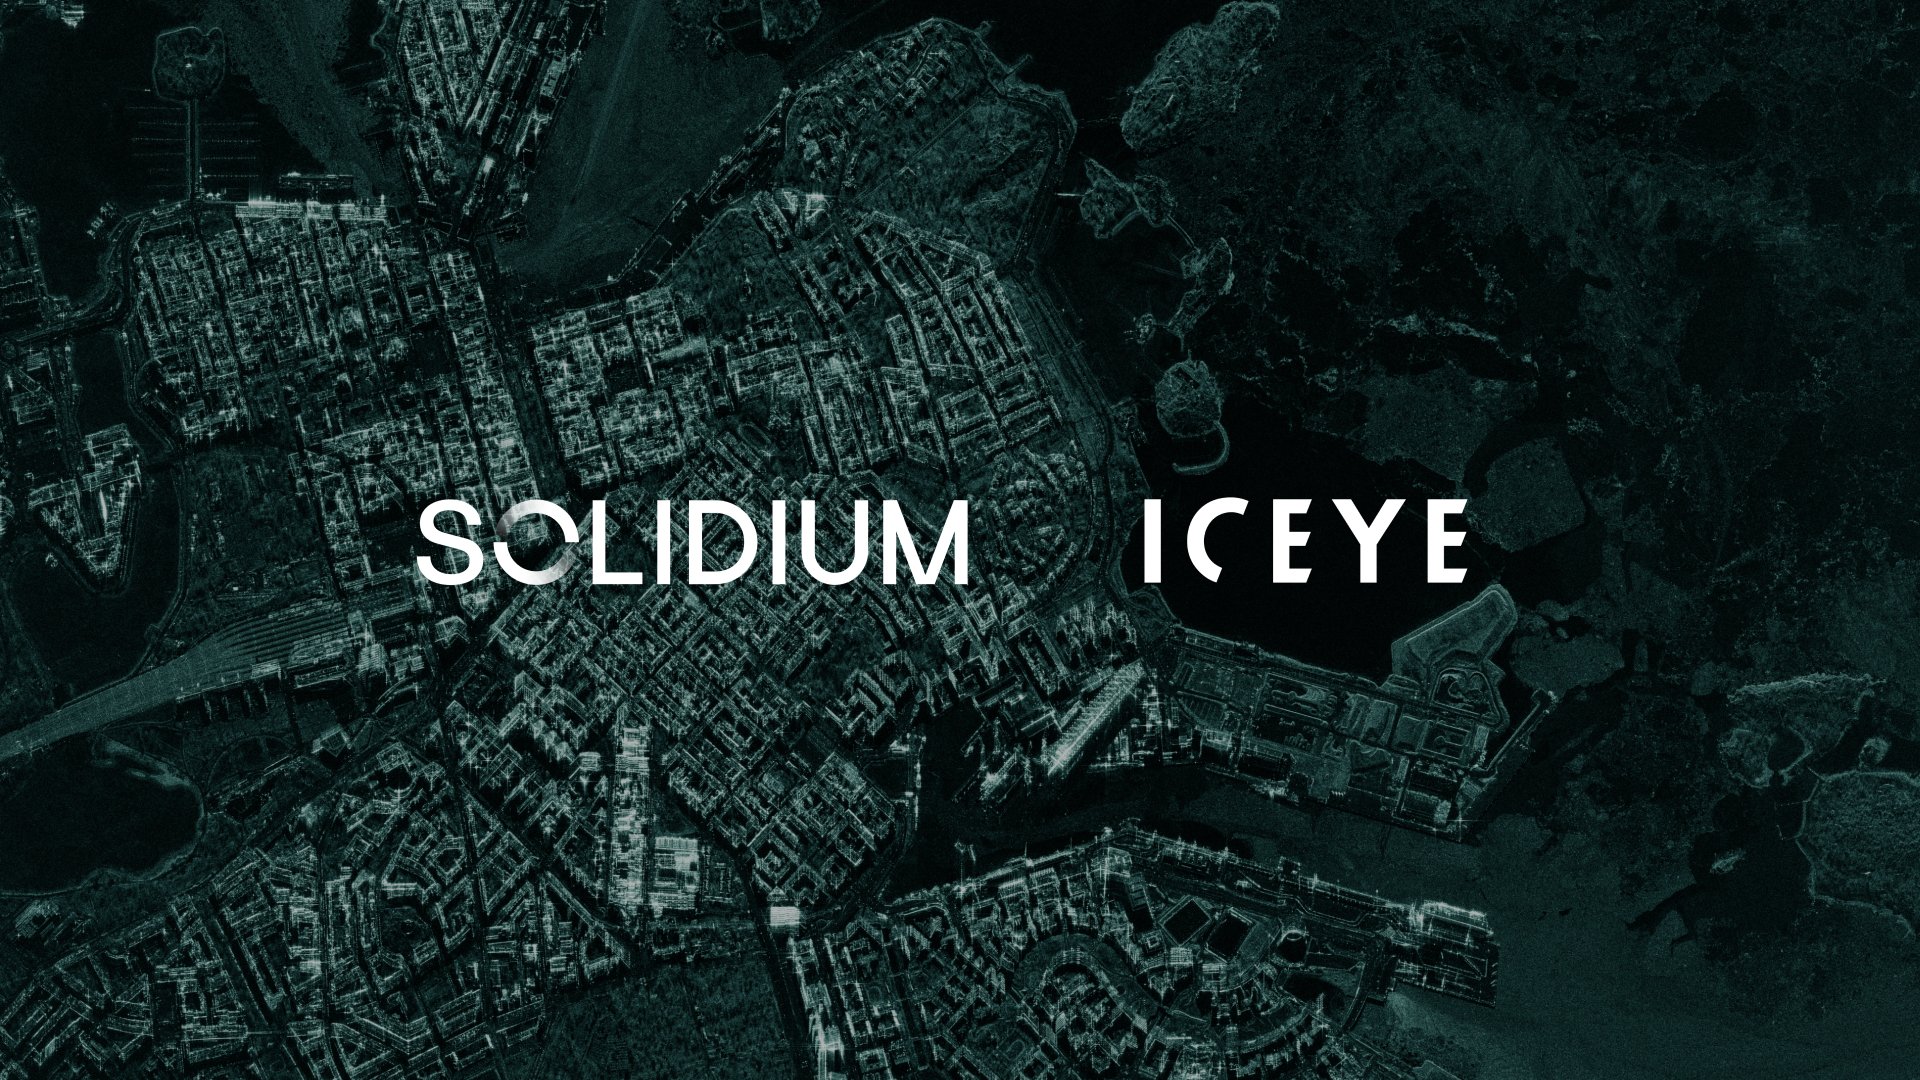 Solidium and ICEYE logos over an image taken with ICEYE satellite technology